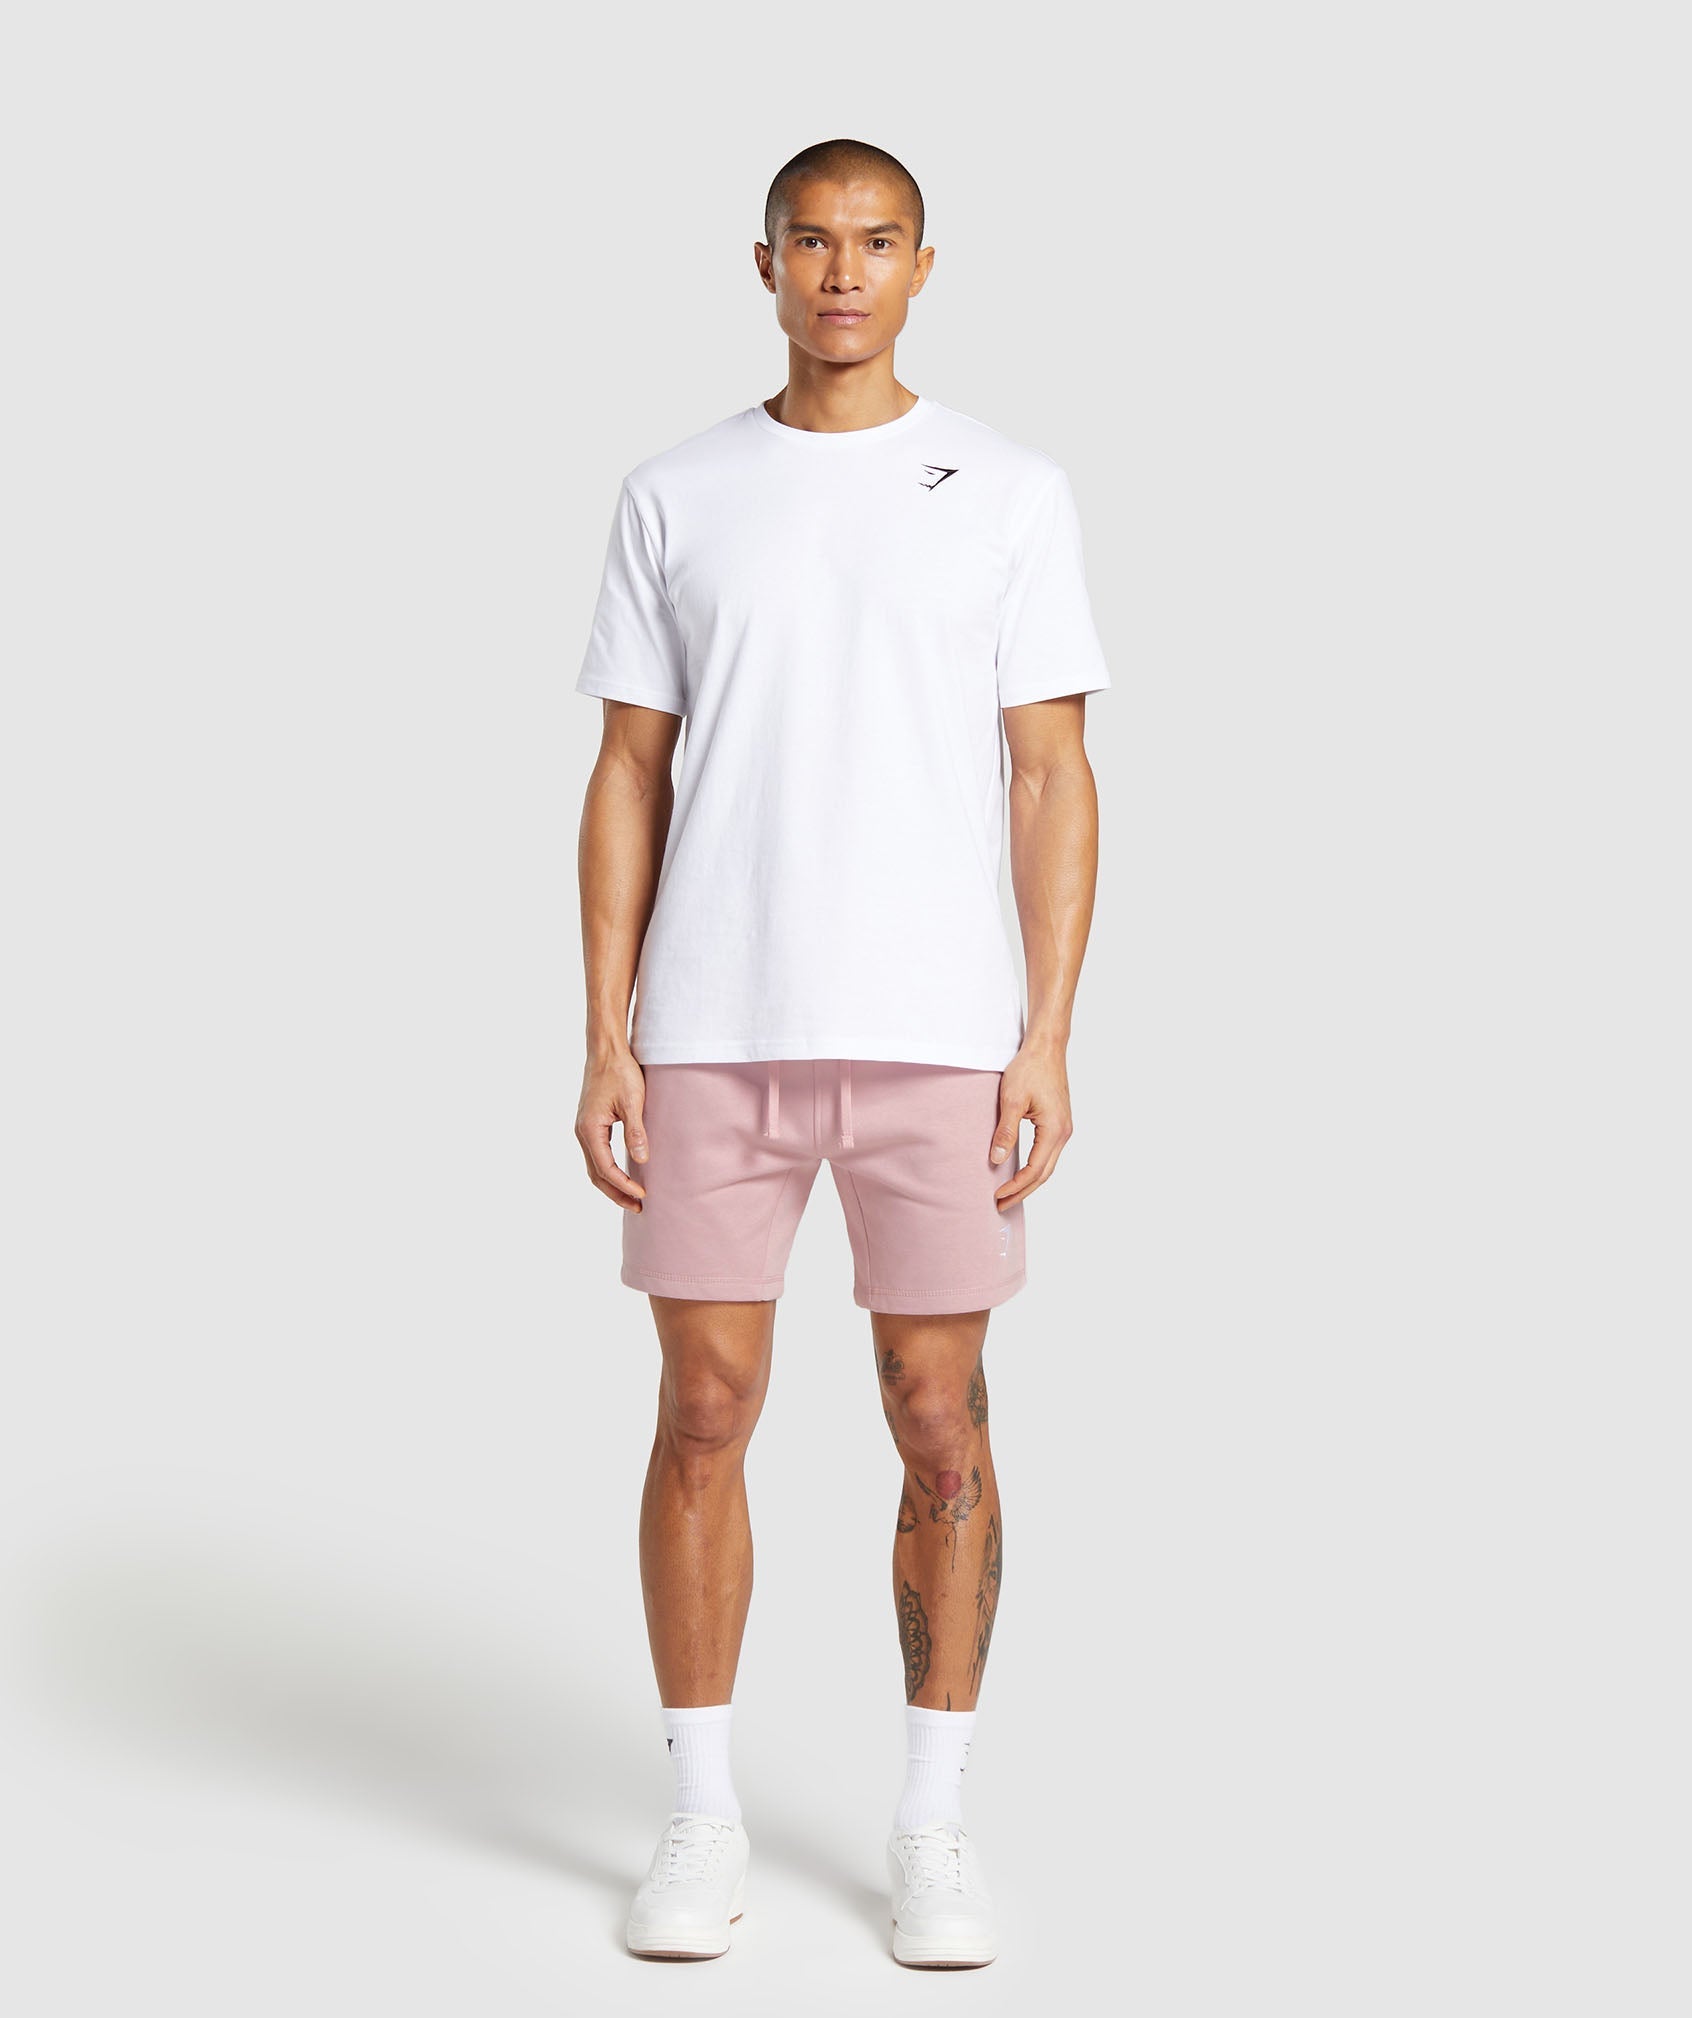 Crest 7" Shorts in Light Pink - view 4